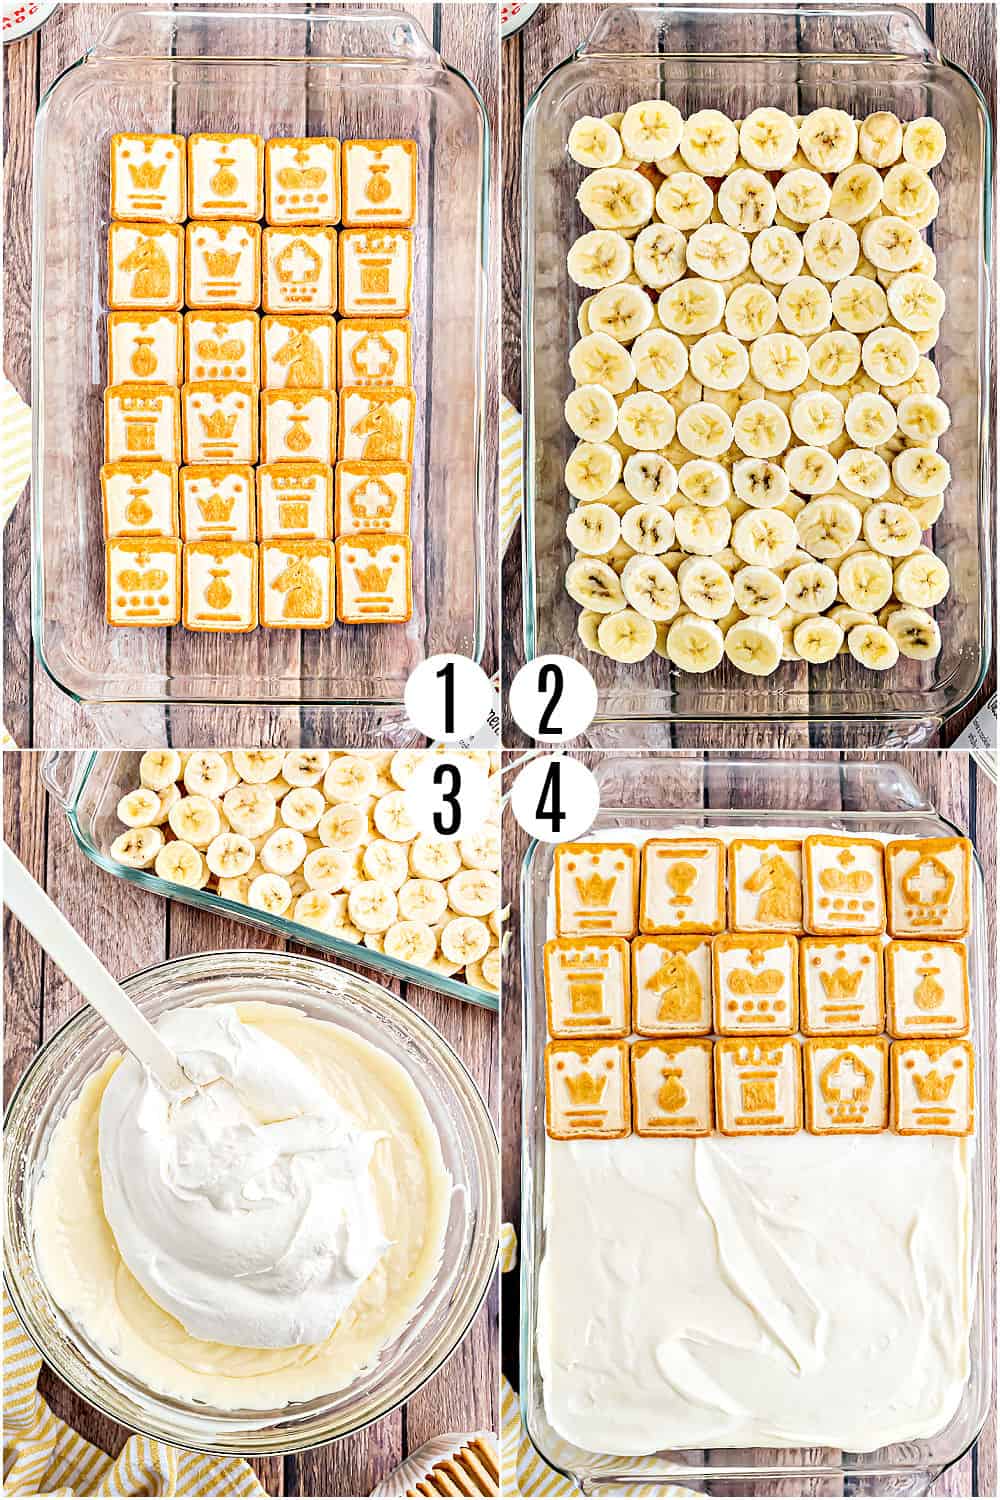 Step by step photos showing how to make banana pudding.